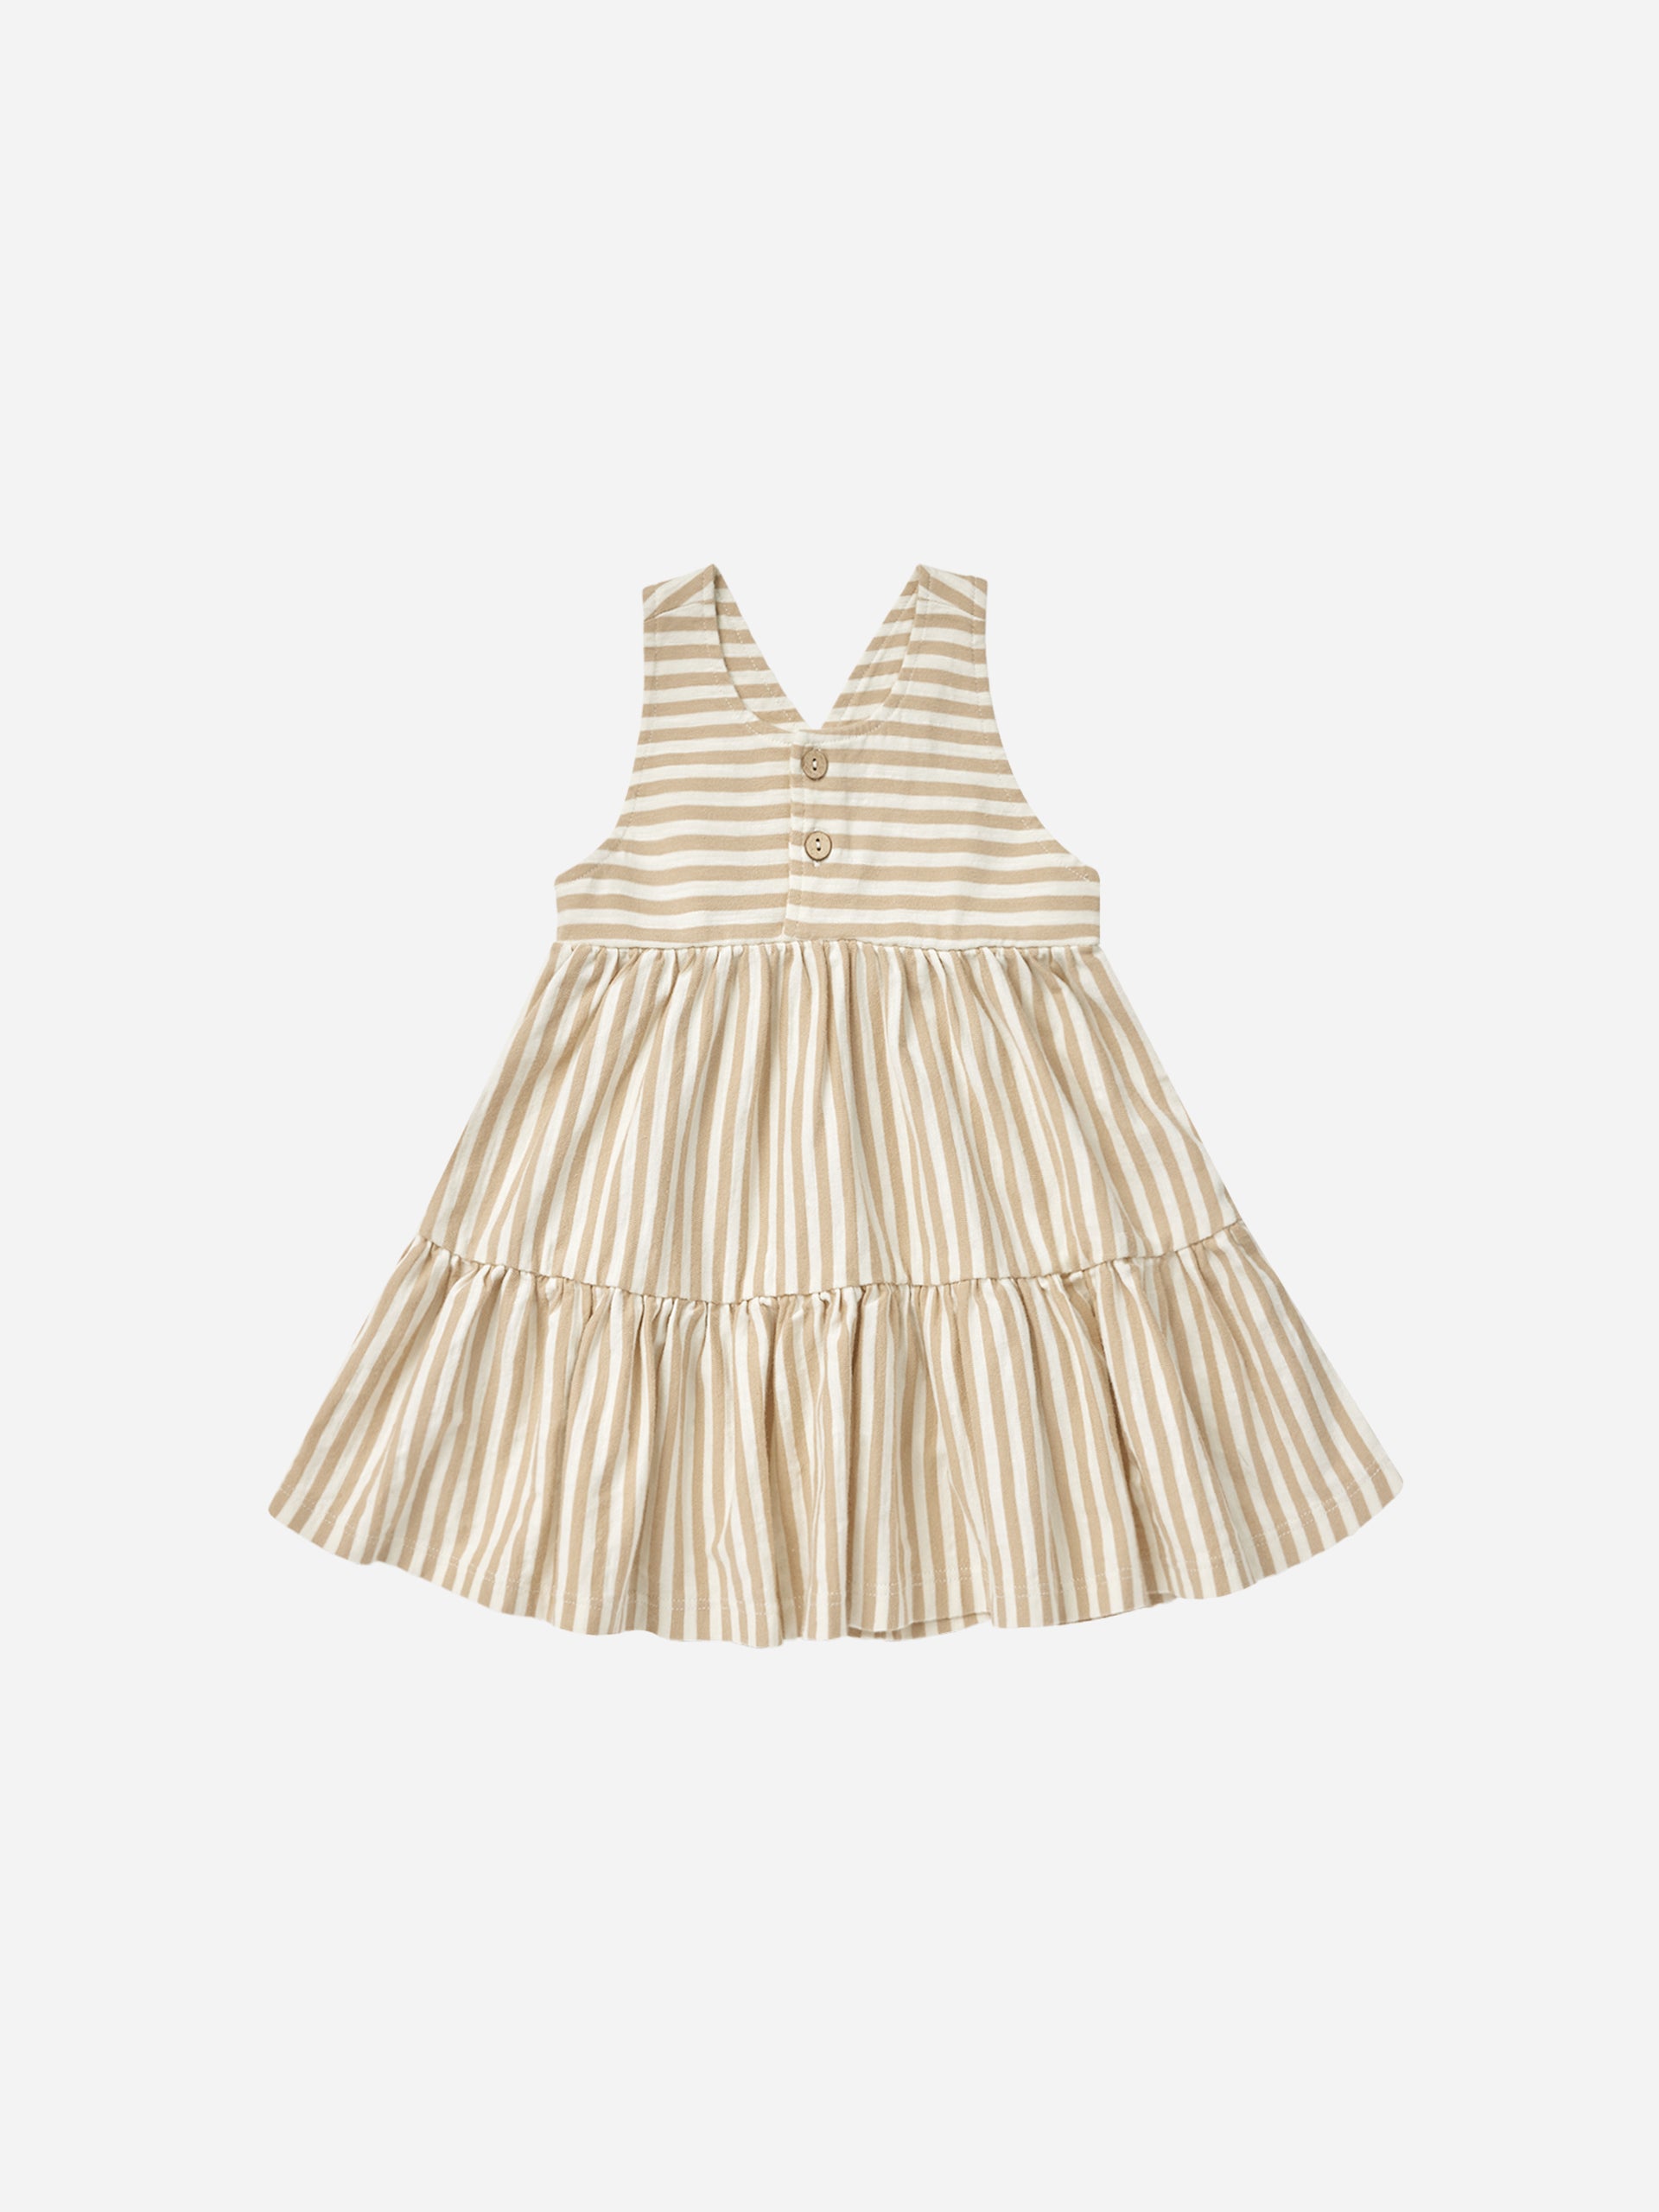 Ruby Swing Dress || Sand Stripe - Rylee + Cru | Kids Clothes | Trendy Baby Clothes | Modern Infant Outfits |